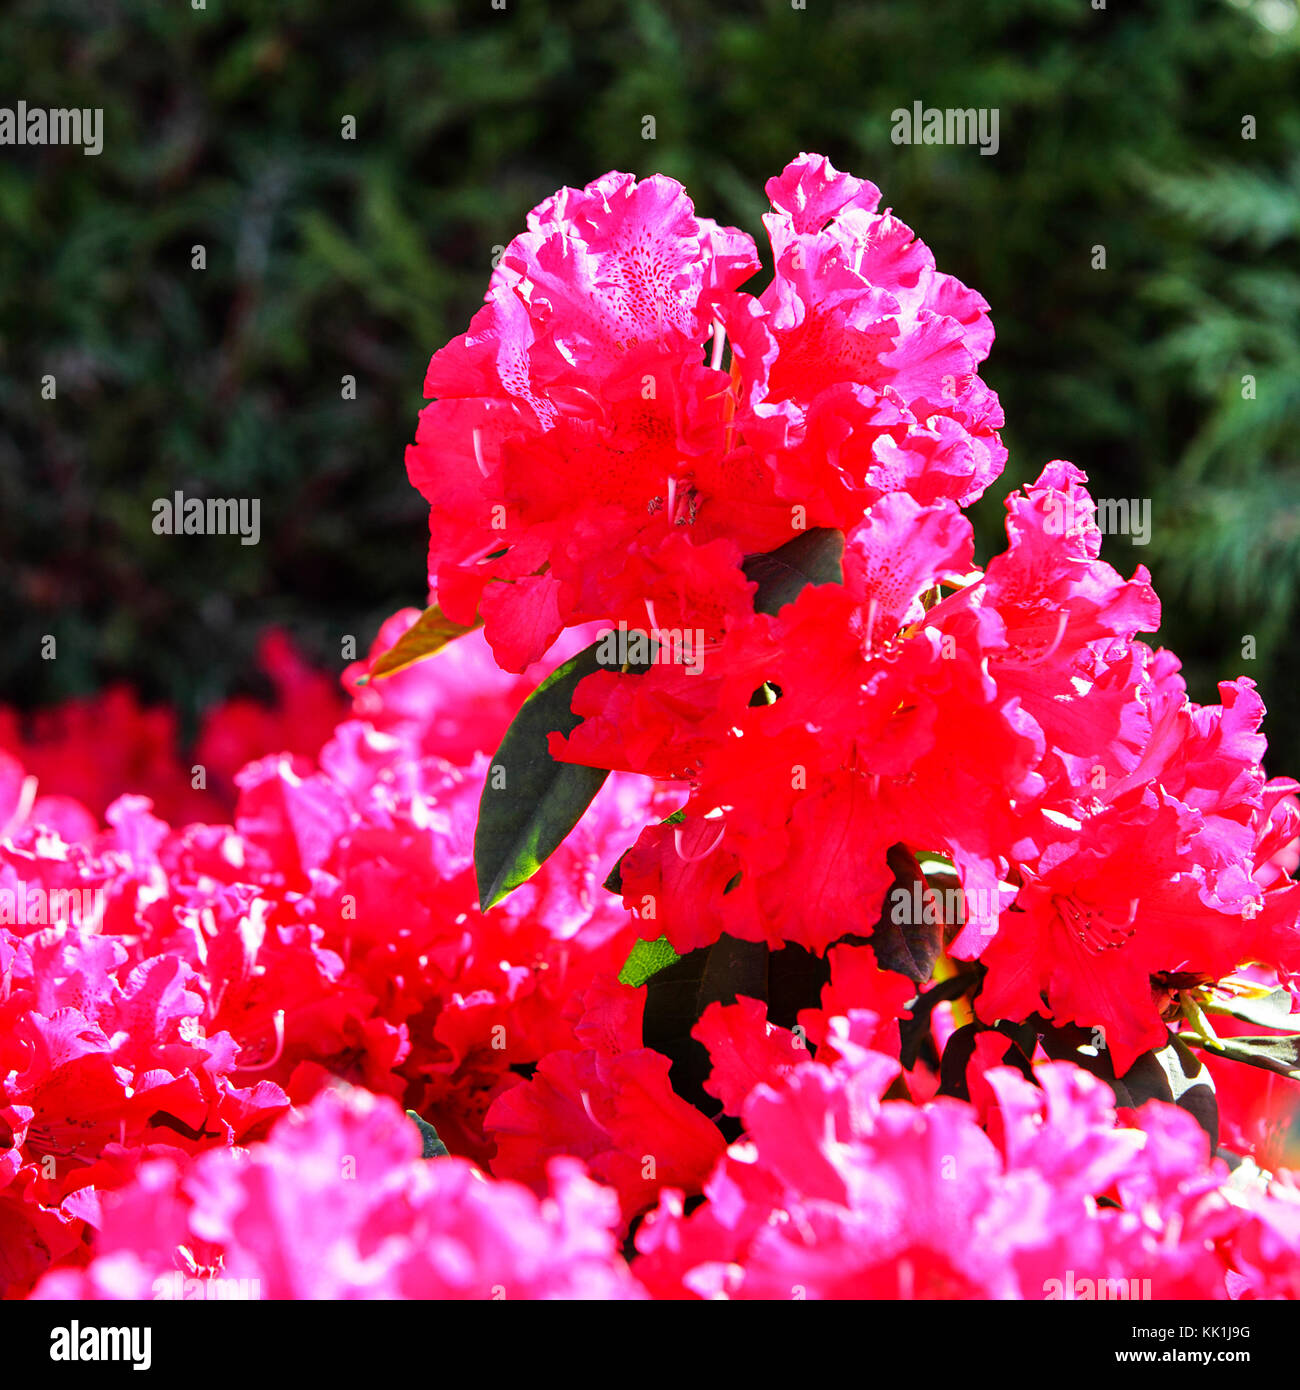 Rhododendrons in full bloom captured by photographer Peter Wheeler in his rear garden in Shropshire. Stock Photo